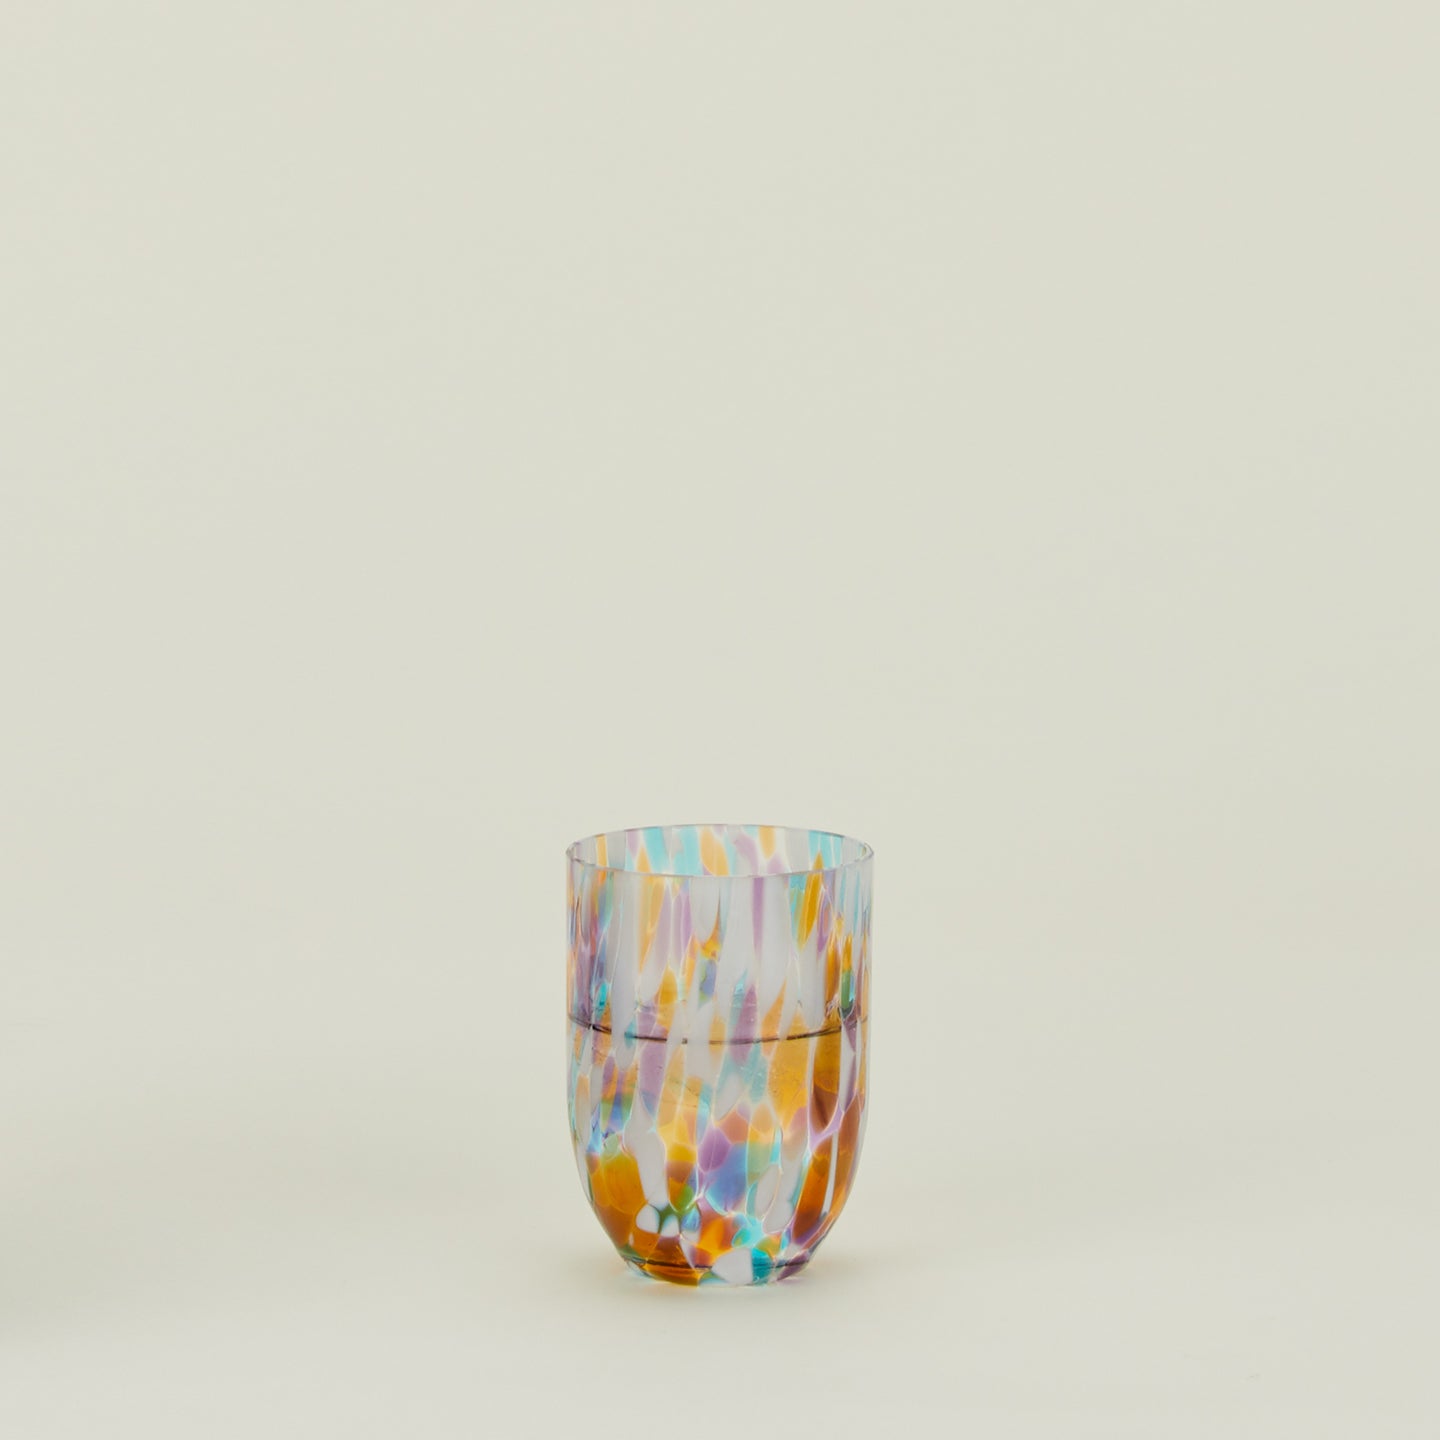 Multi-color glass tumbler filled with water.